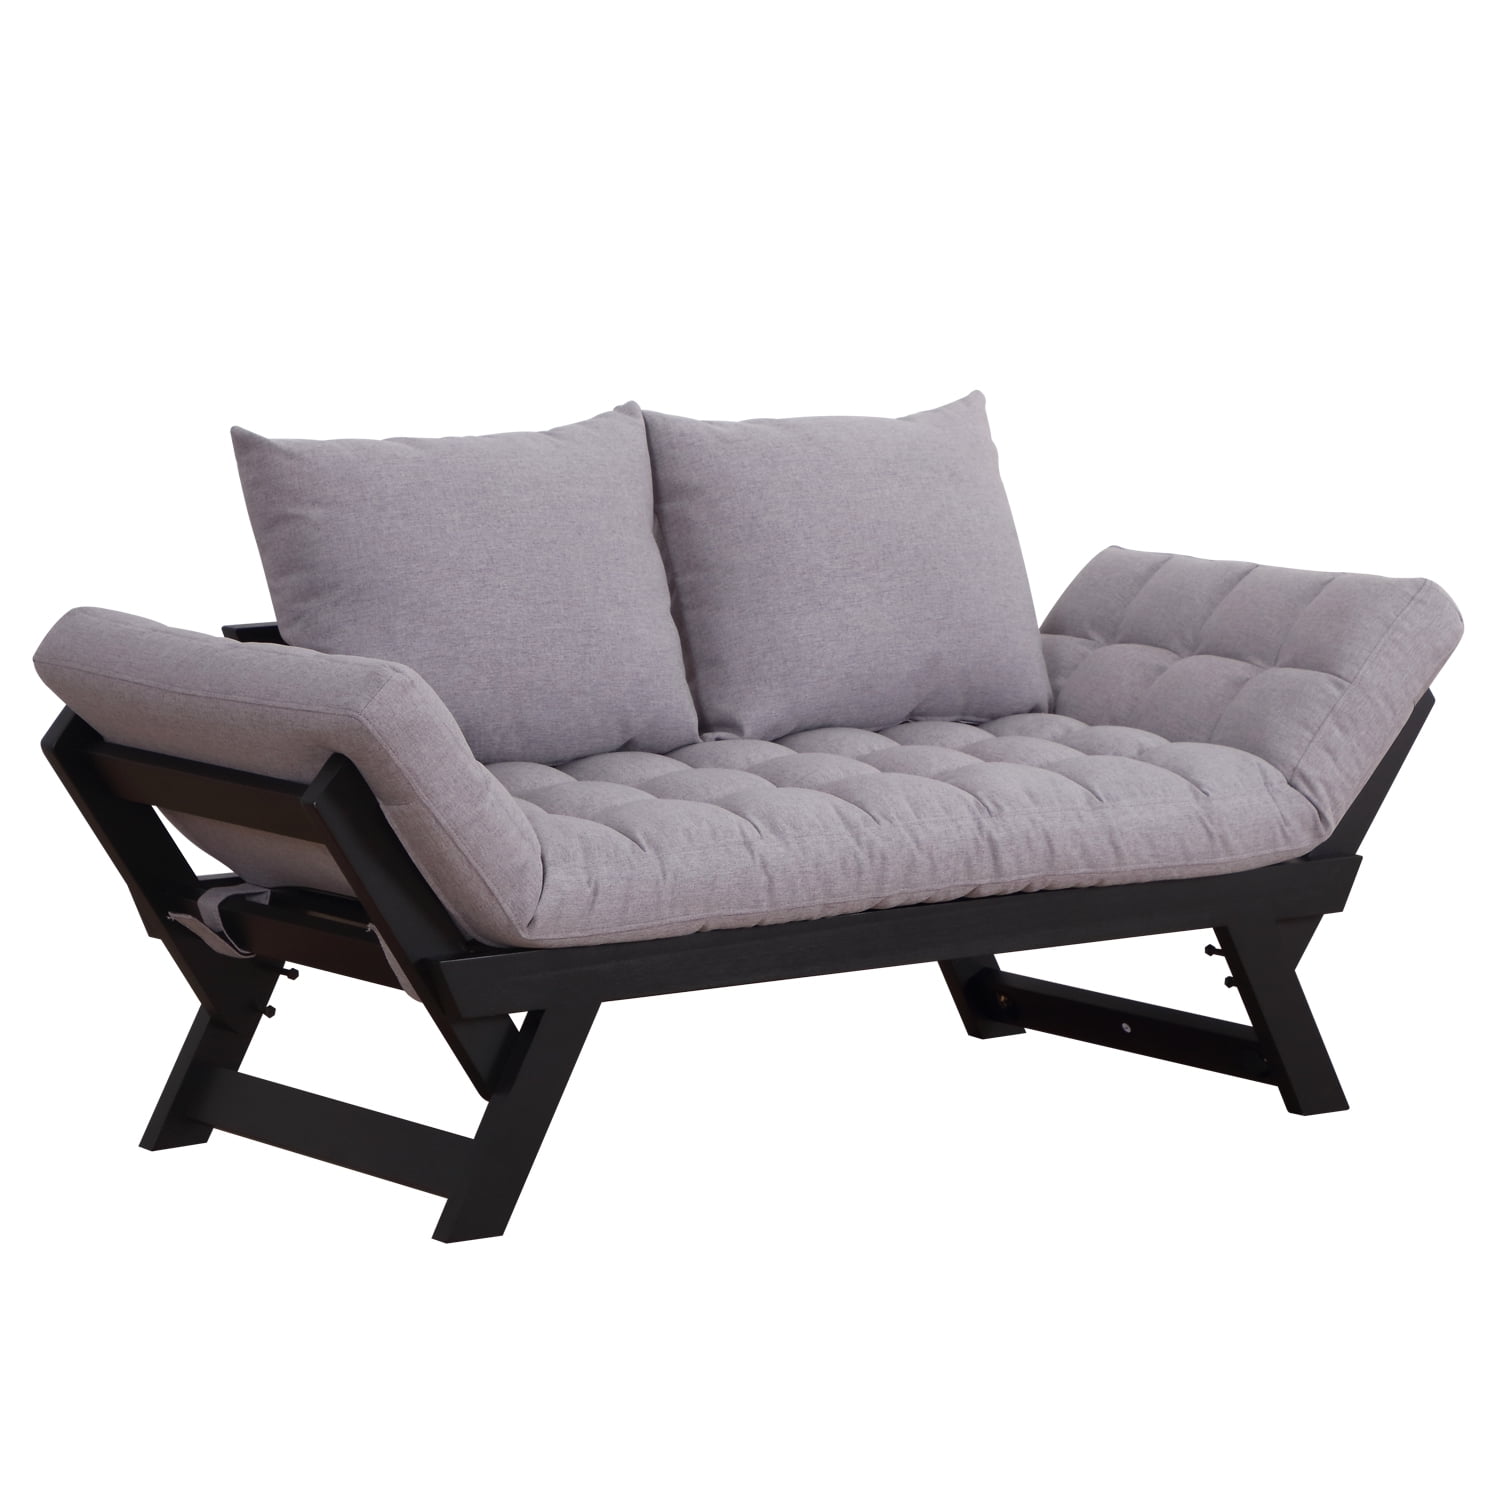 Single Person 3 Position Convertible Couch Chaise